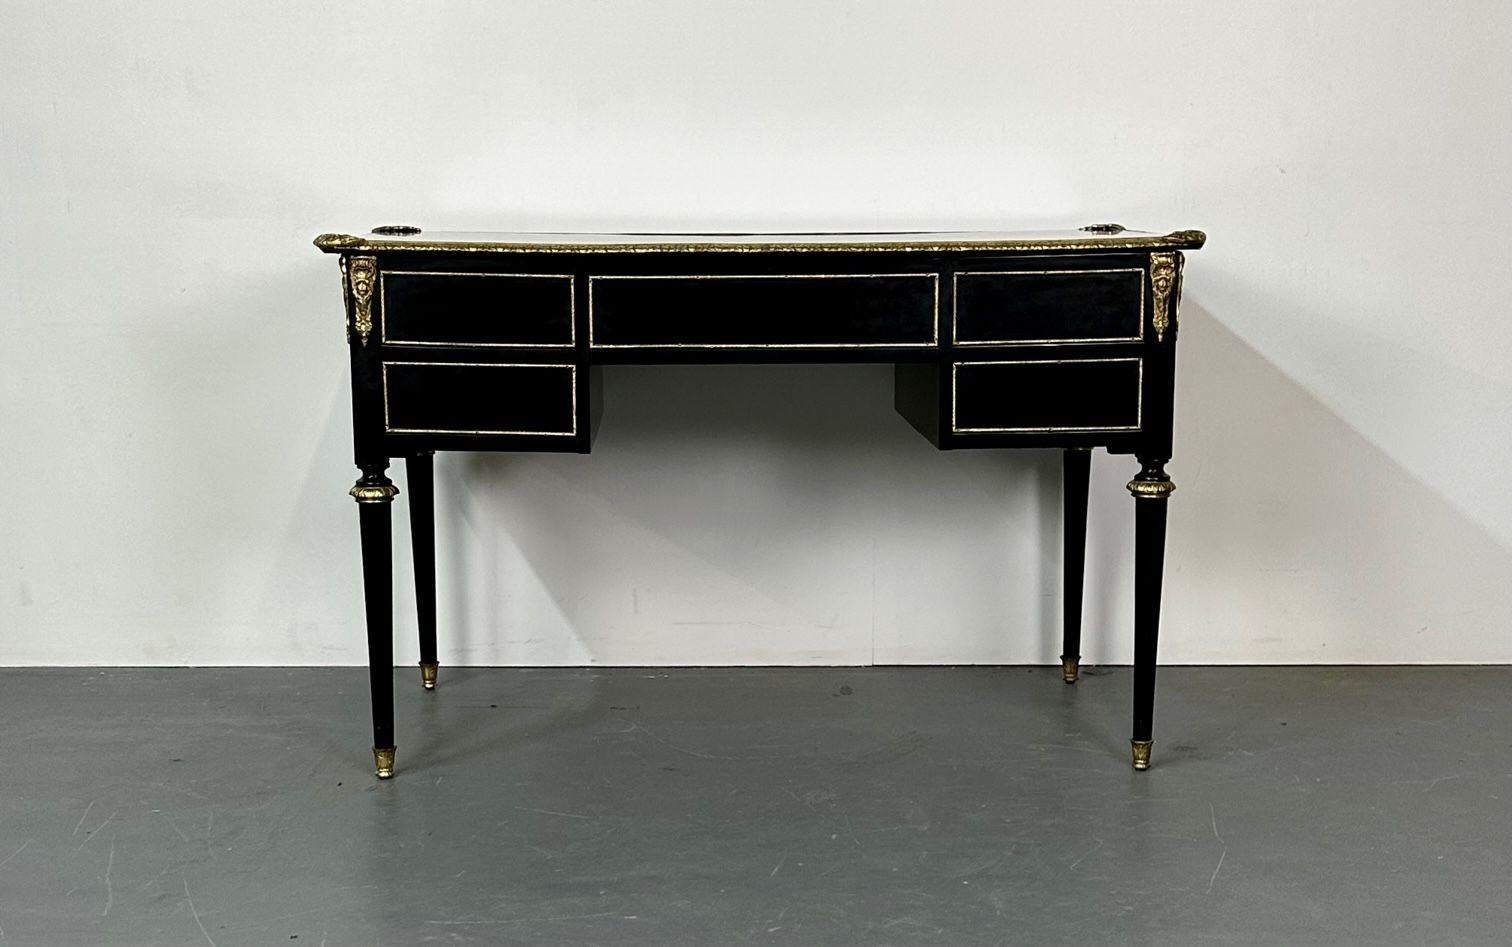 Hollywood Regency Ebony Desk, Writing Table or Vanity, Bronze Mounted, 1930s For Sale 3